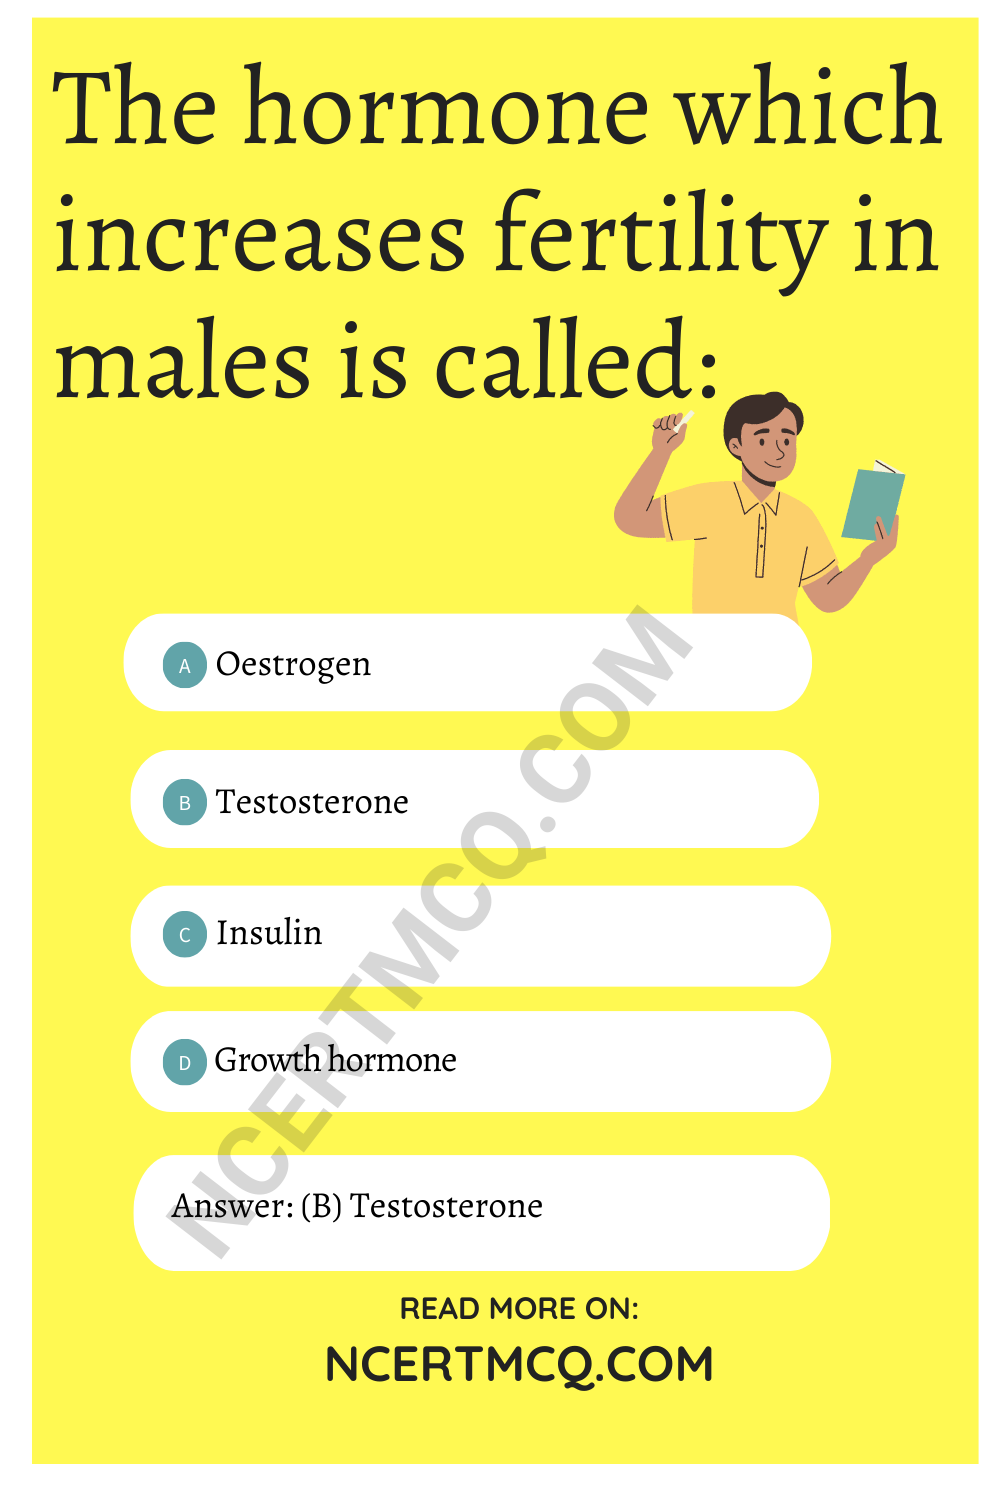 The hormone which increases fertility in males is called: